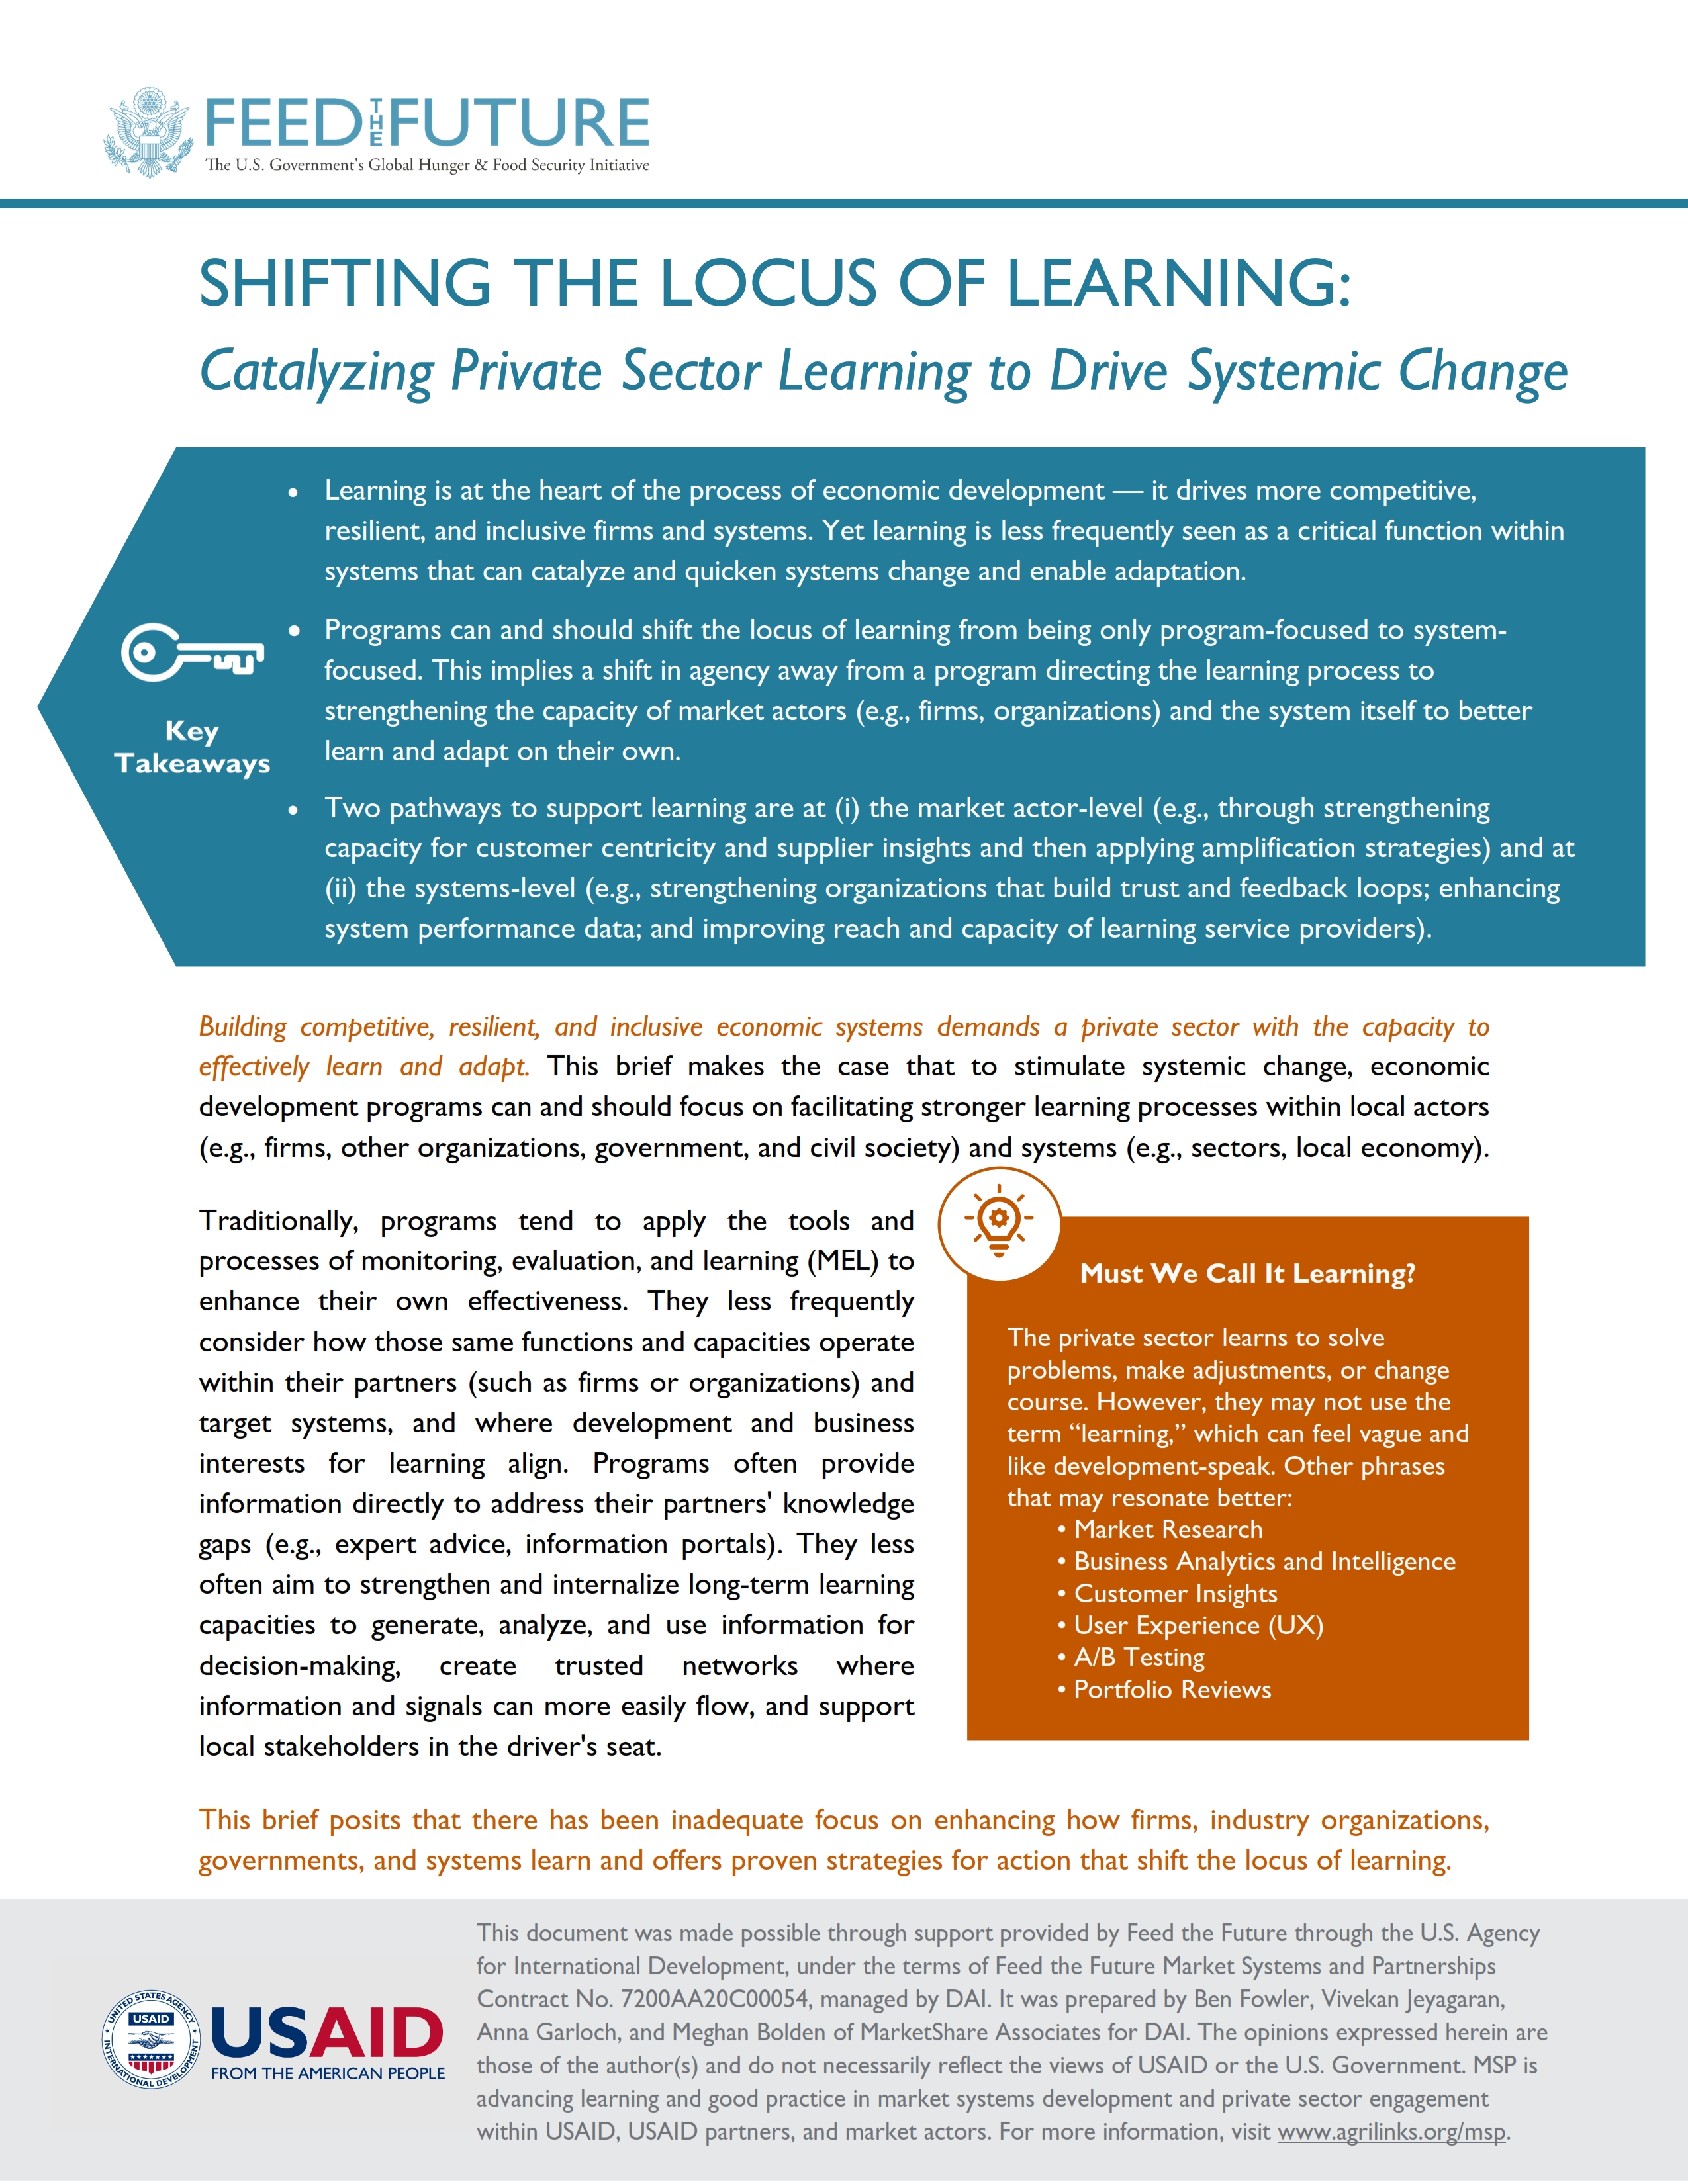 SHIFTING THE LOCUS OF LEARNING:  Catalyzing Private Sector Learning to Drive Systemic Change